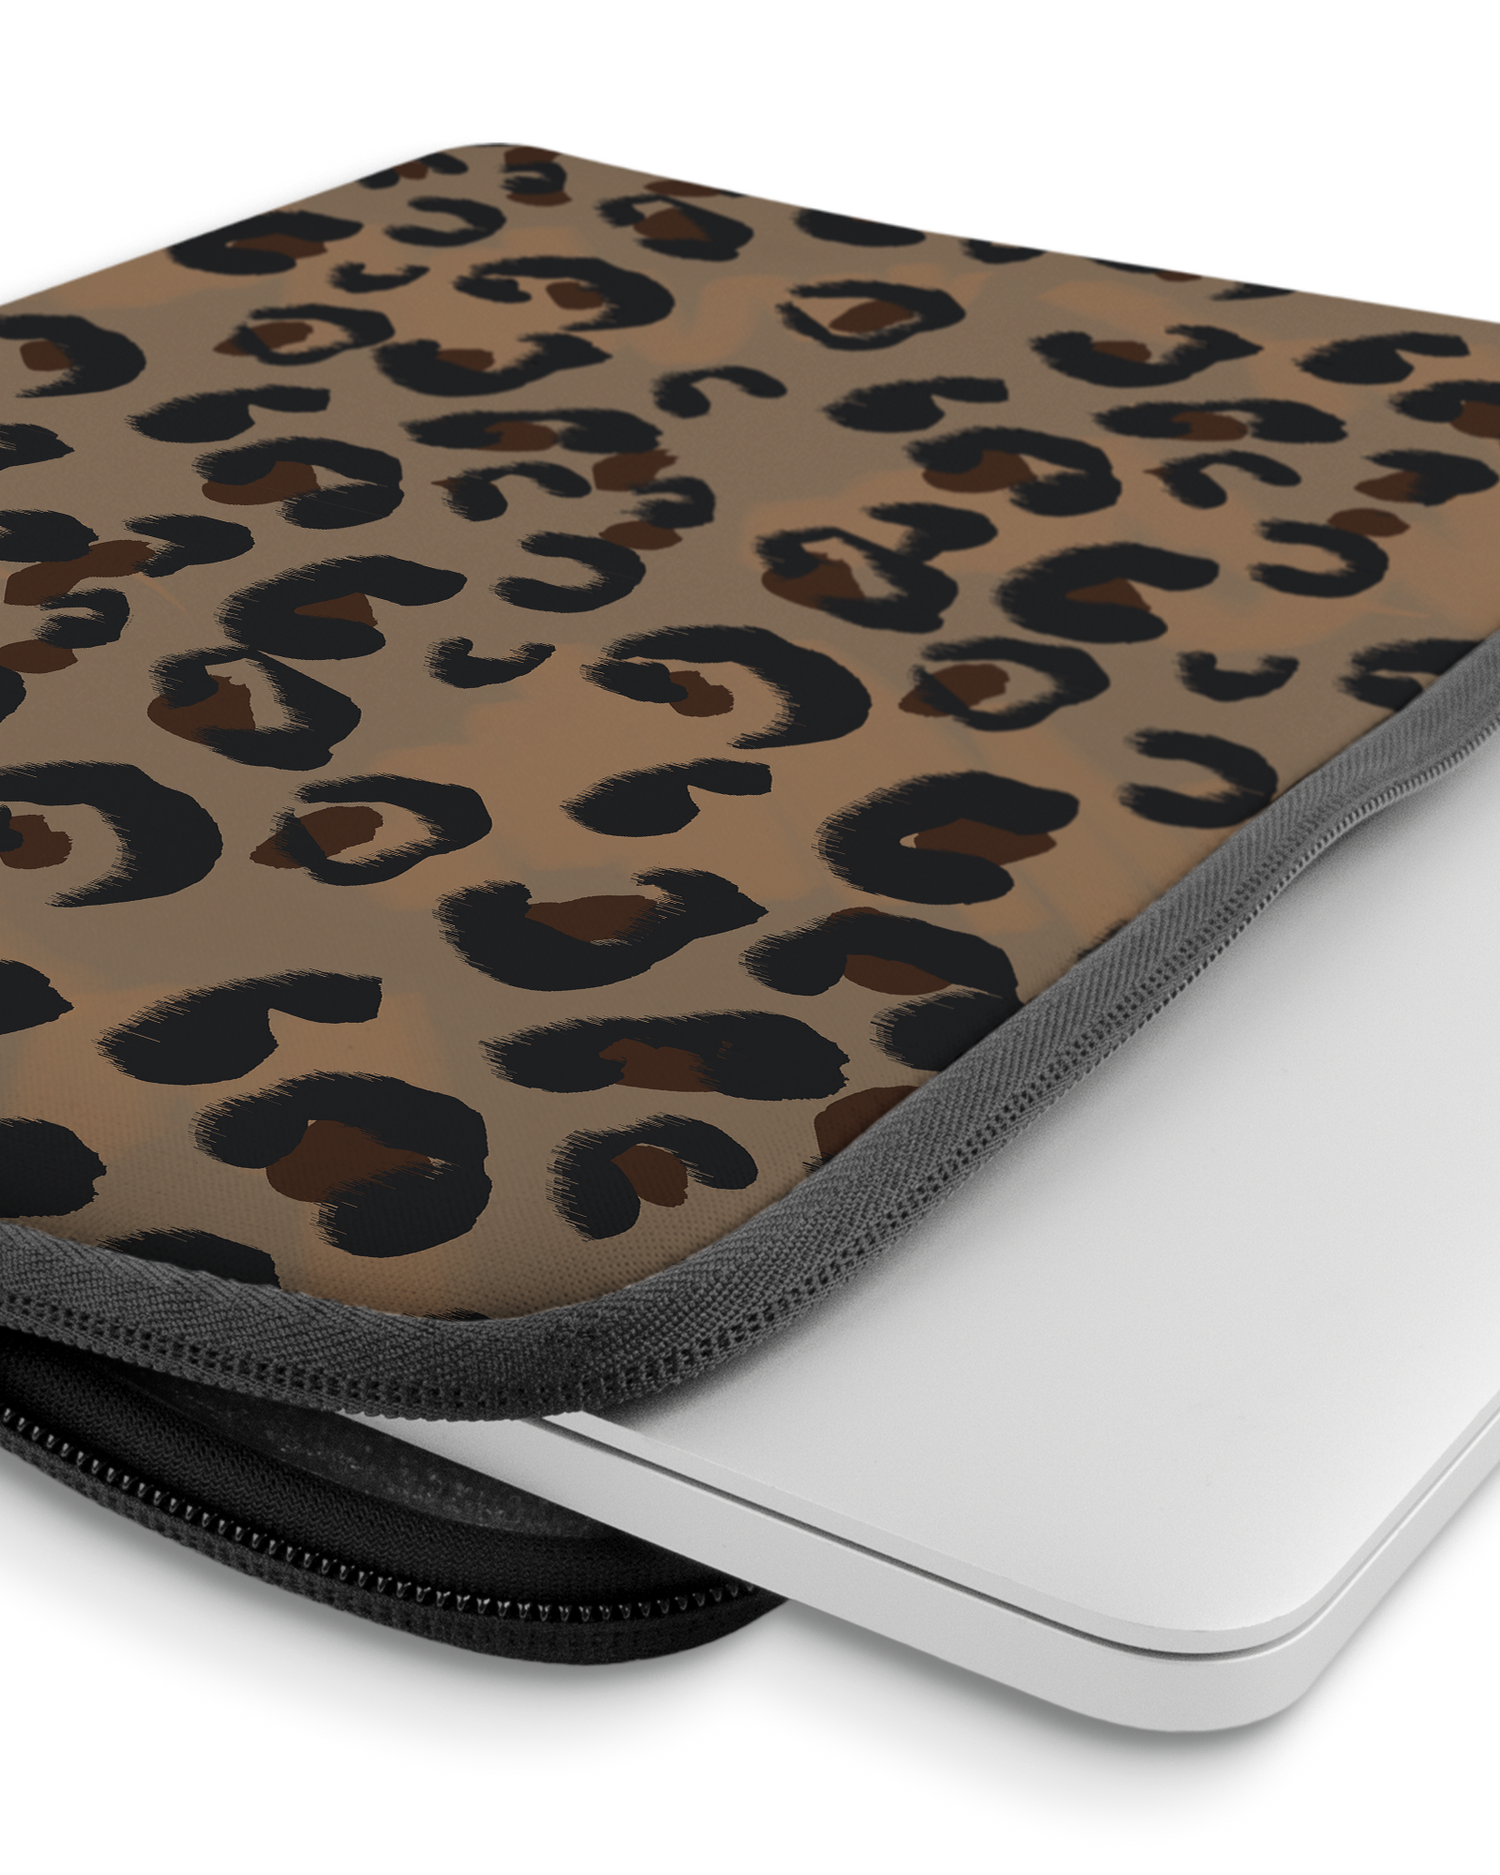 Leopard Repeat Laptop Case 14 inch with device inside